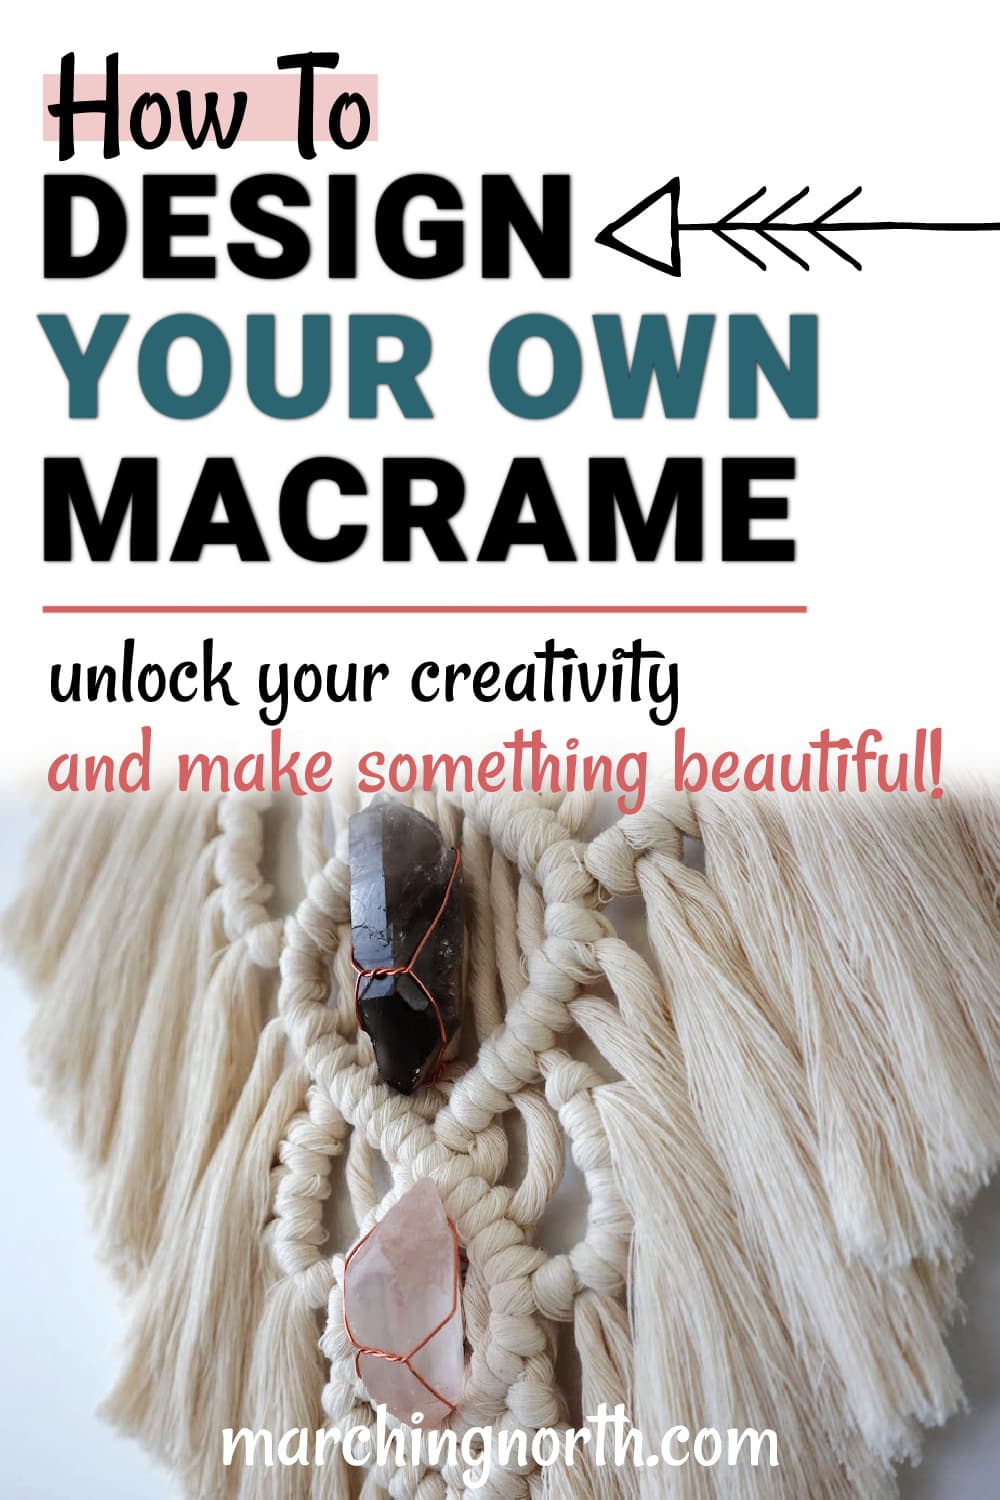 Pinterest pin for how to design your own macrame post